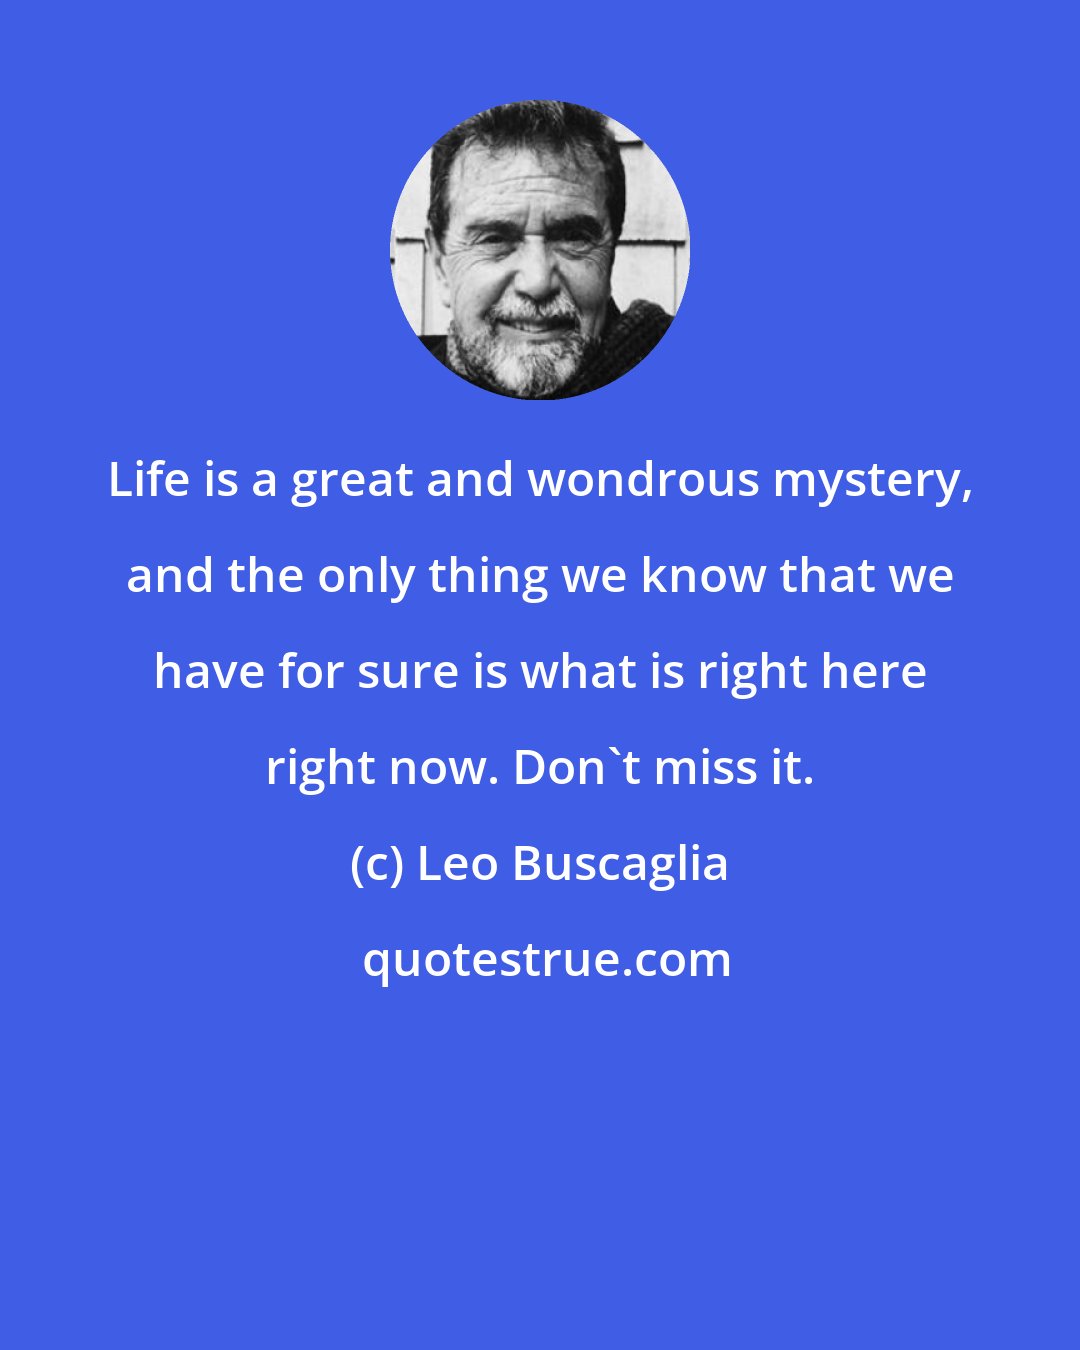 Leo Buscaglia: Life is a great and wondrous mystery, and the only thing we know that we have for sure is what is right here right now. Don't miss it.